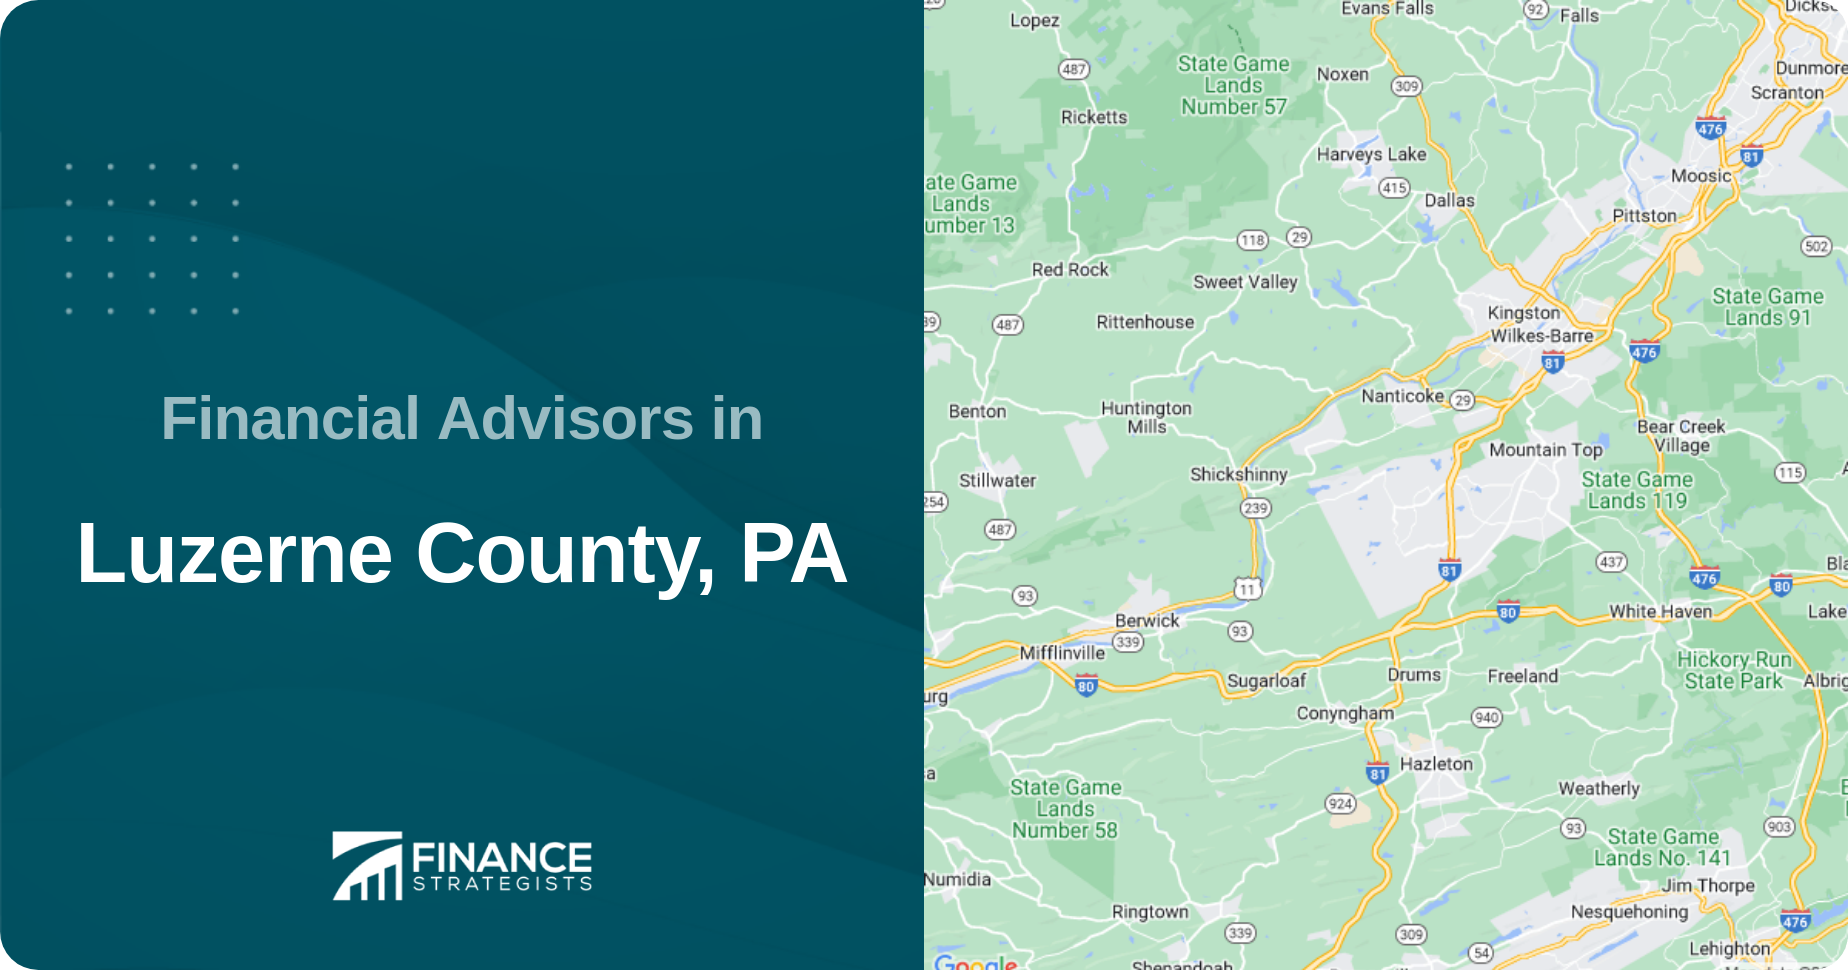 Financial Advisors in Luzerne County, PA